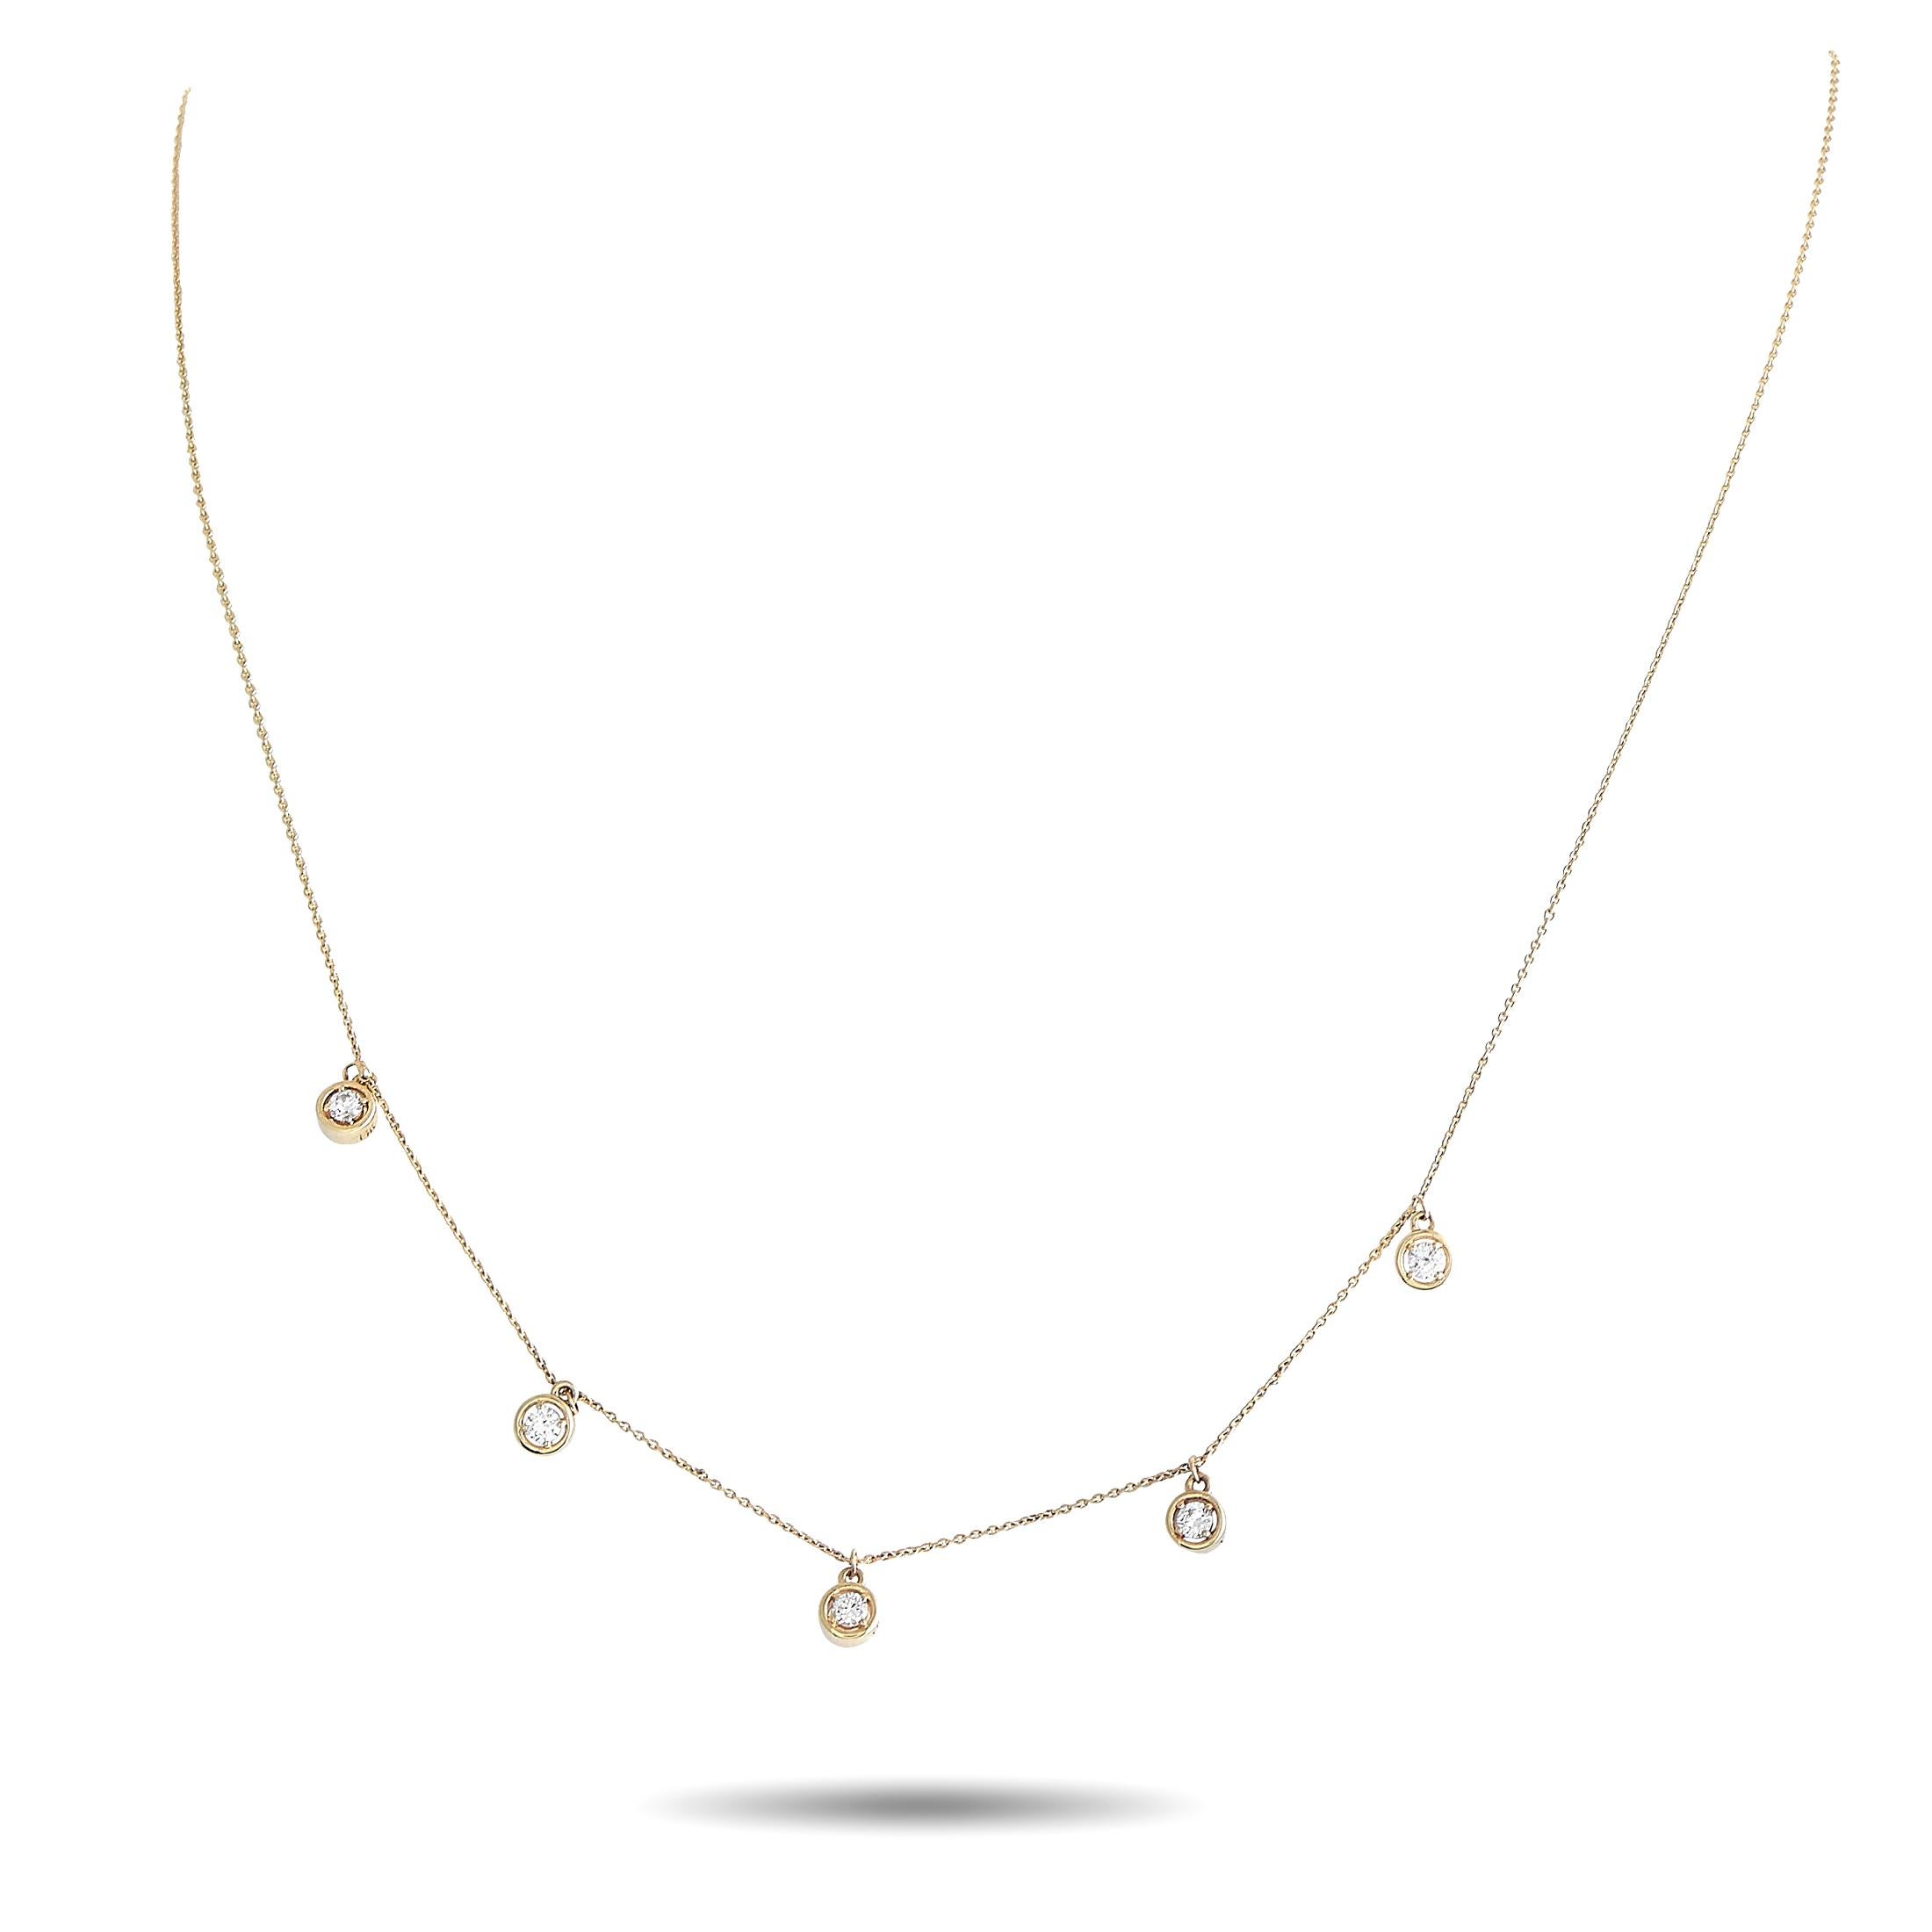 14K Yellow Gold 0.25ct Diamond Station Necklace NK01459-Y In New Condition For Sale In Southampton, PA